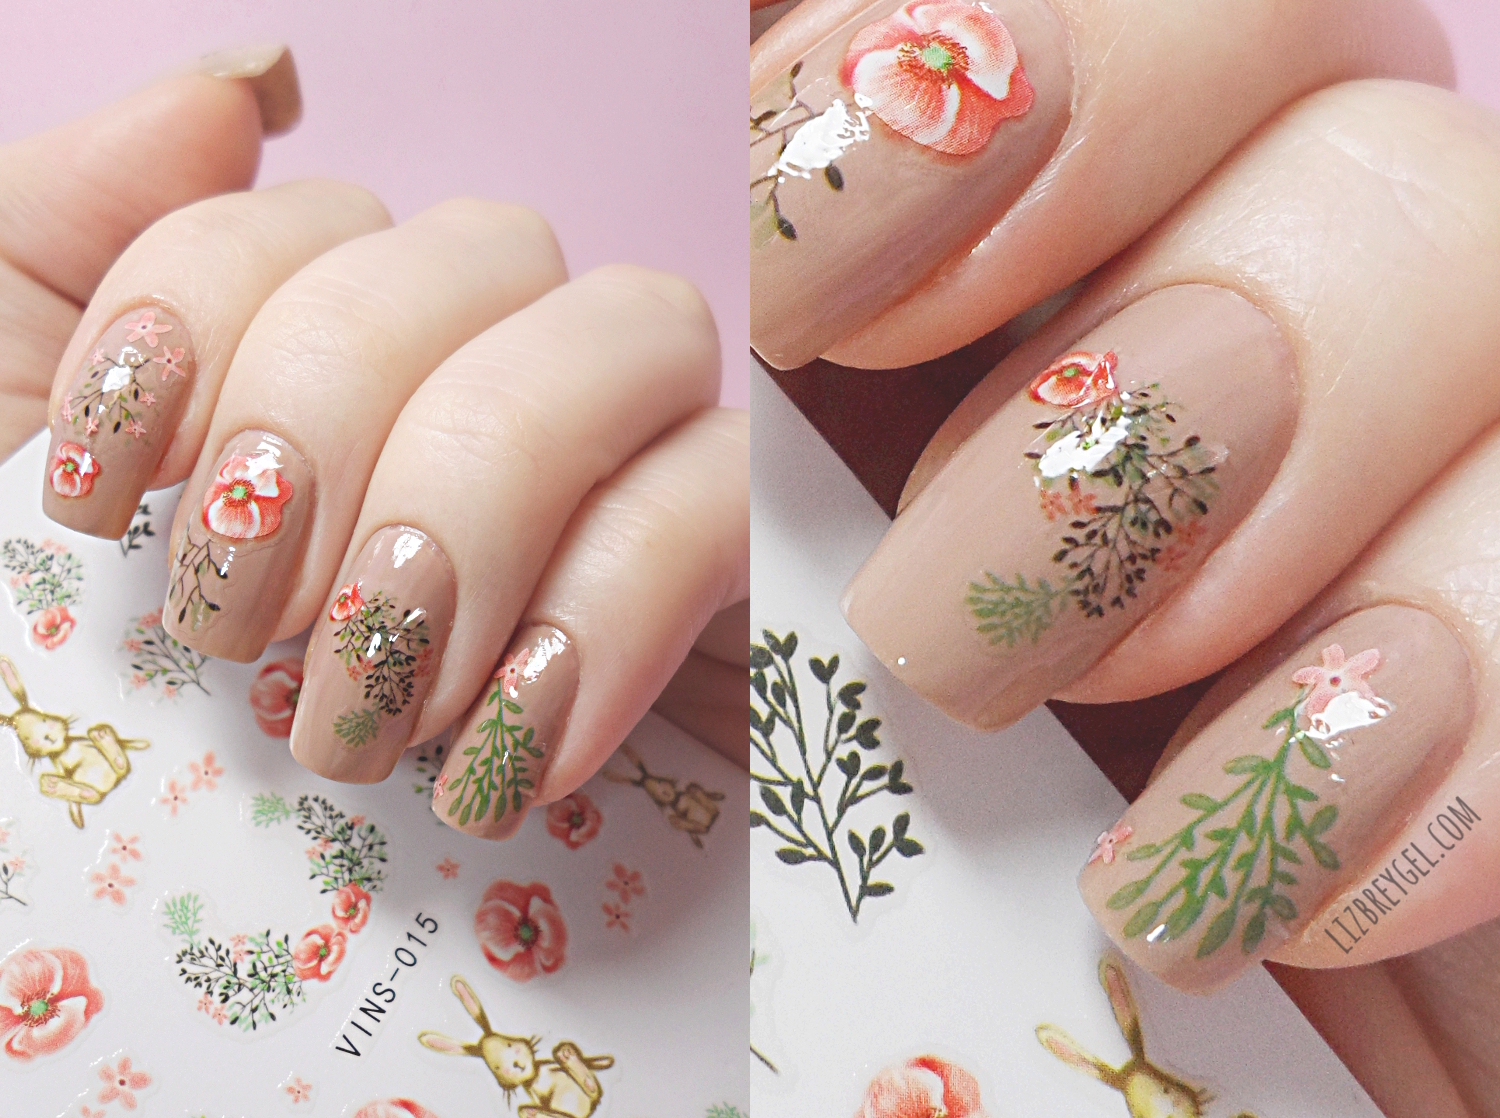 Natural Dry Floral Leaf Nail Art Stickers Level Set Multi Color 3D Designs  For Manicure From Kellylin2015, $3.45 | DHgate.Com